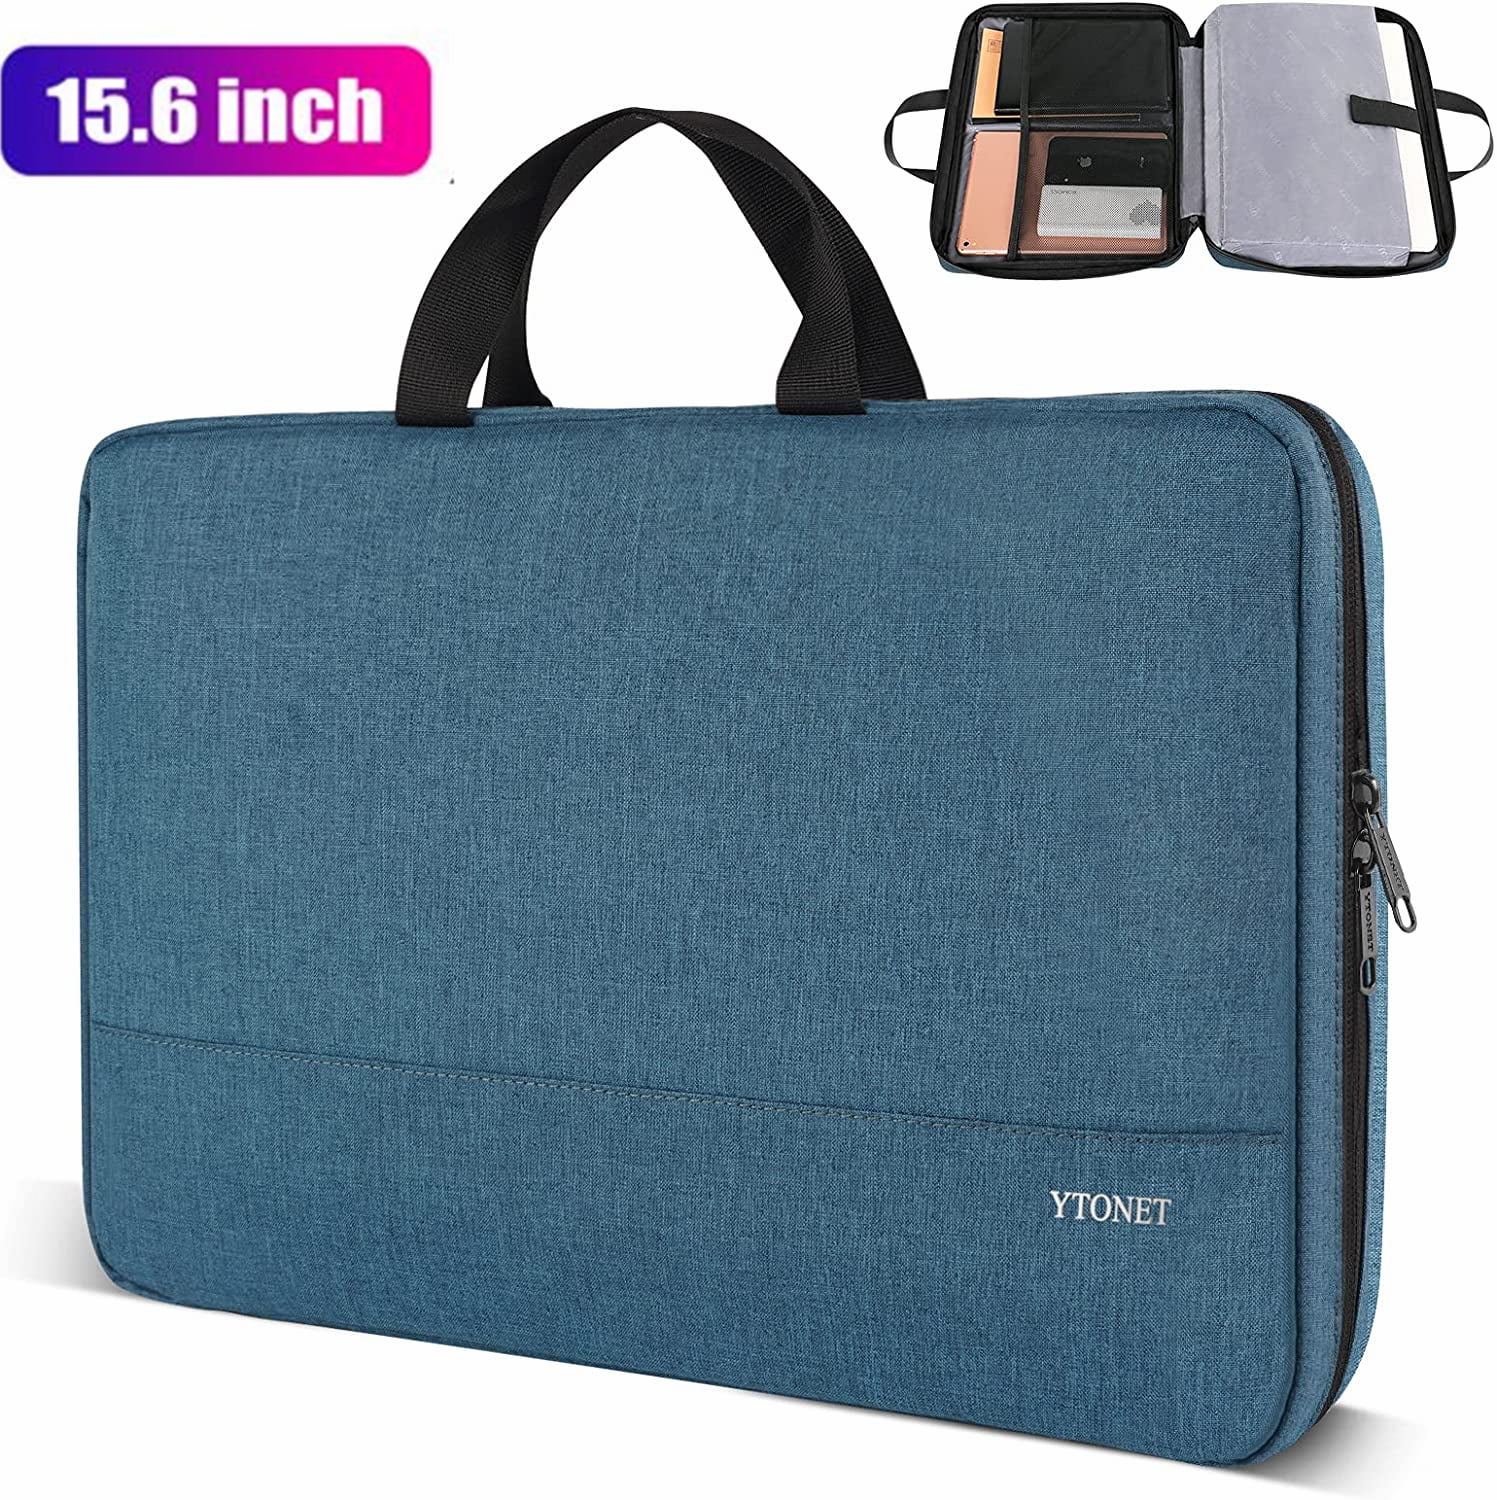 Stylish Crossbody Bags an Image of Soap Bubble Multi-Functional Carryon Laptop Bag Fit for 15 Inch Computer Notebook MacBook 